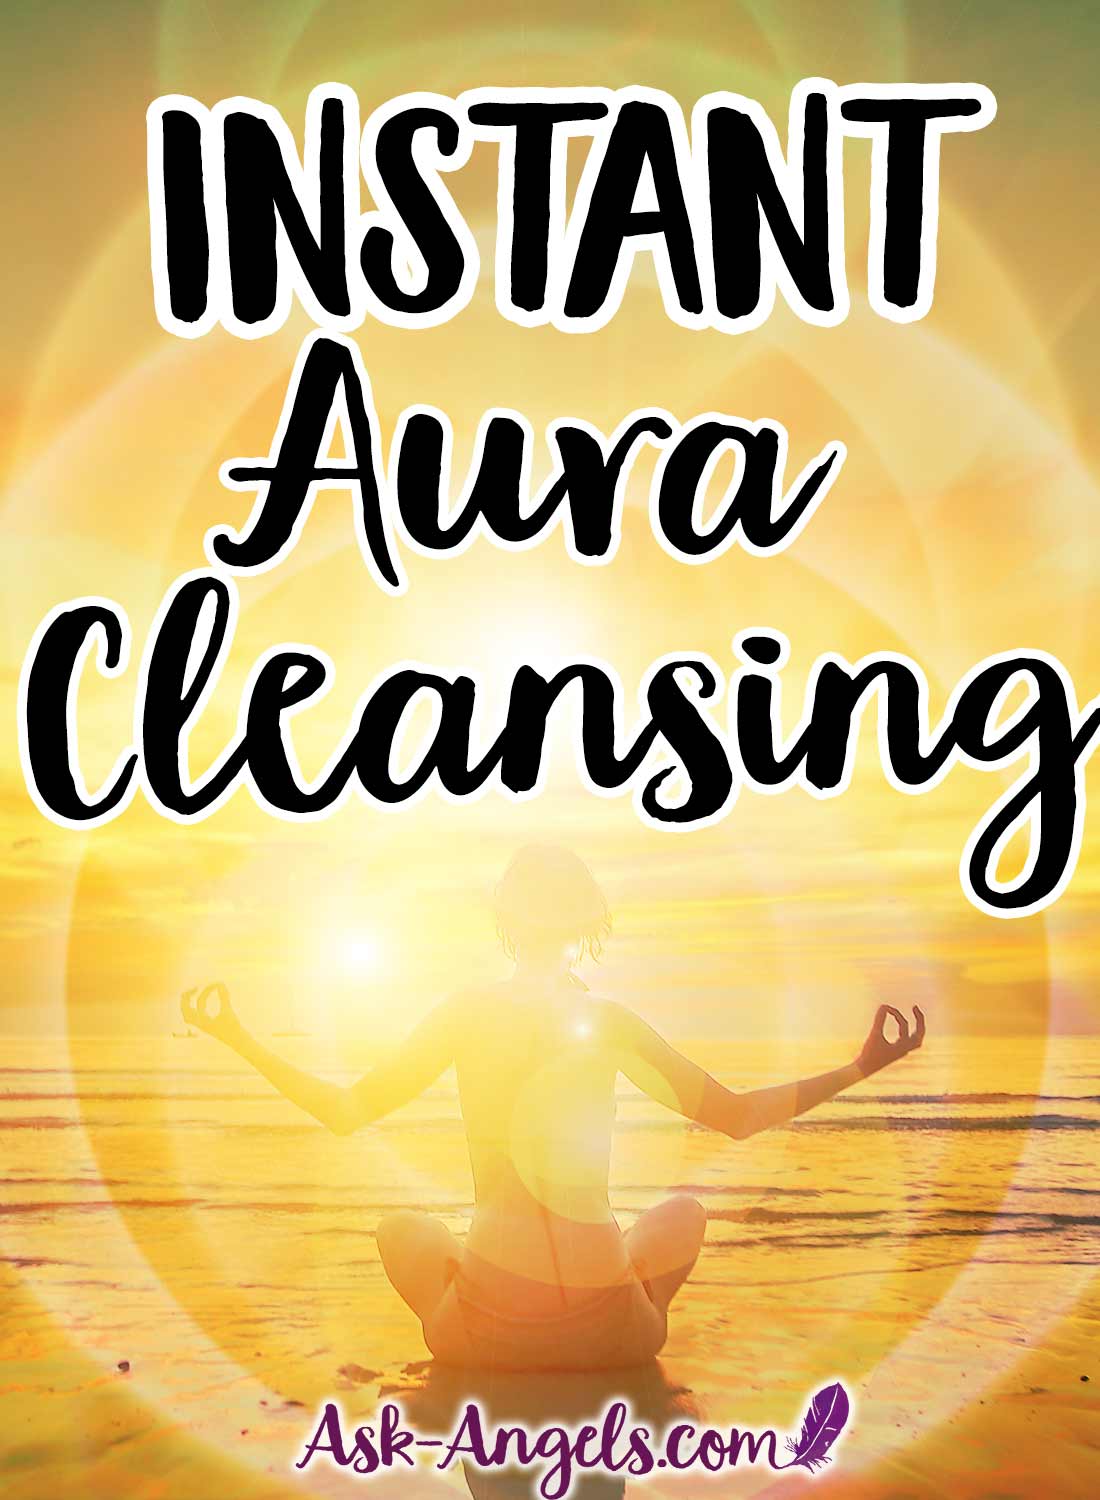 Instant Aura Cleansing - A Powerful Technique to Cleanse and Uplift Your Aura Now!